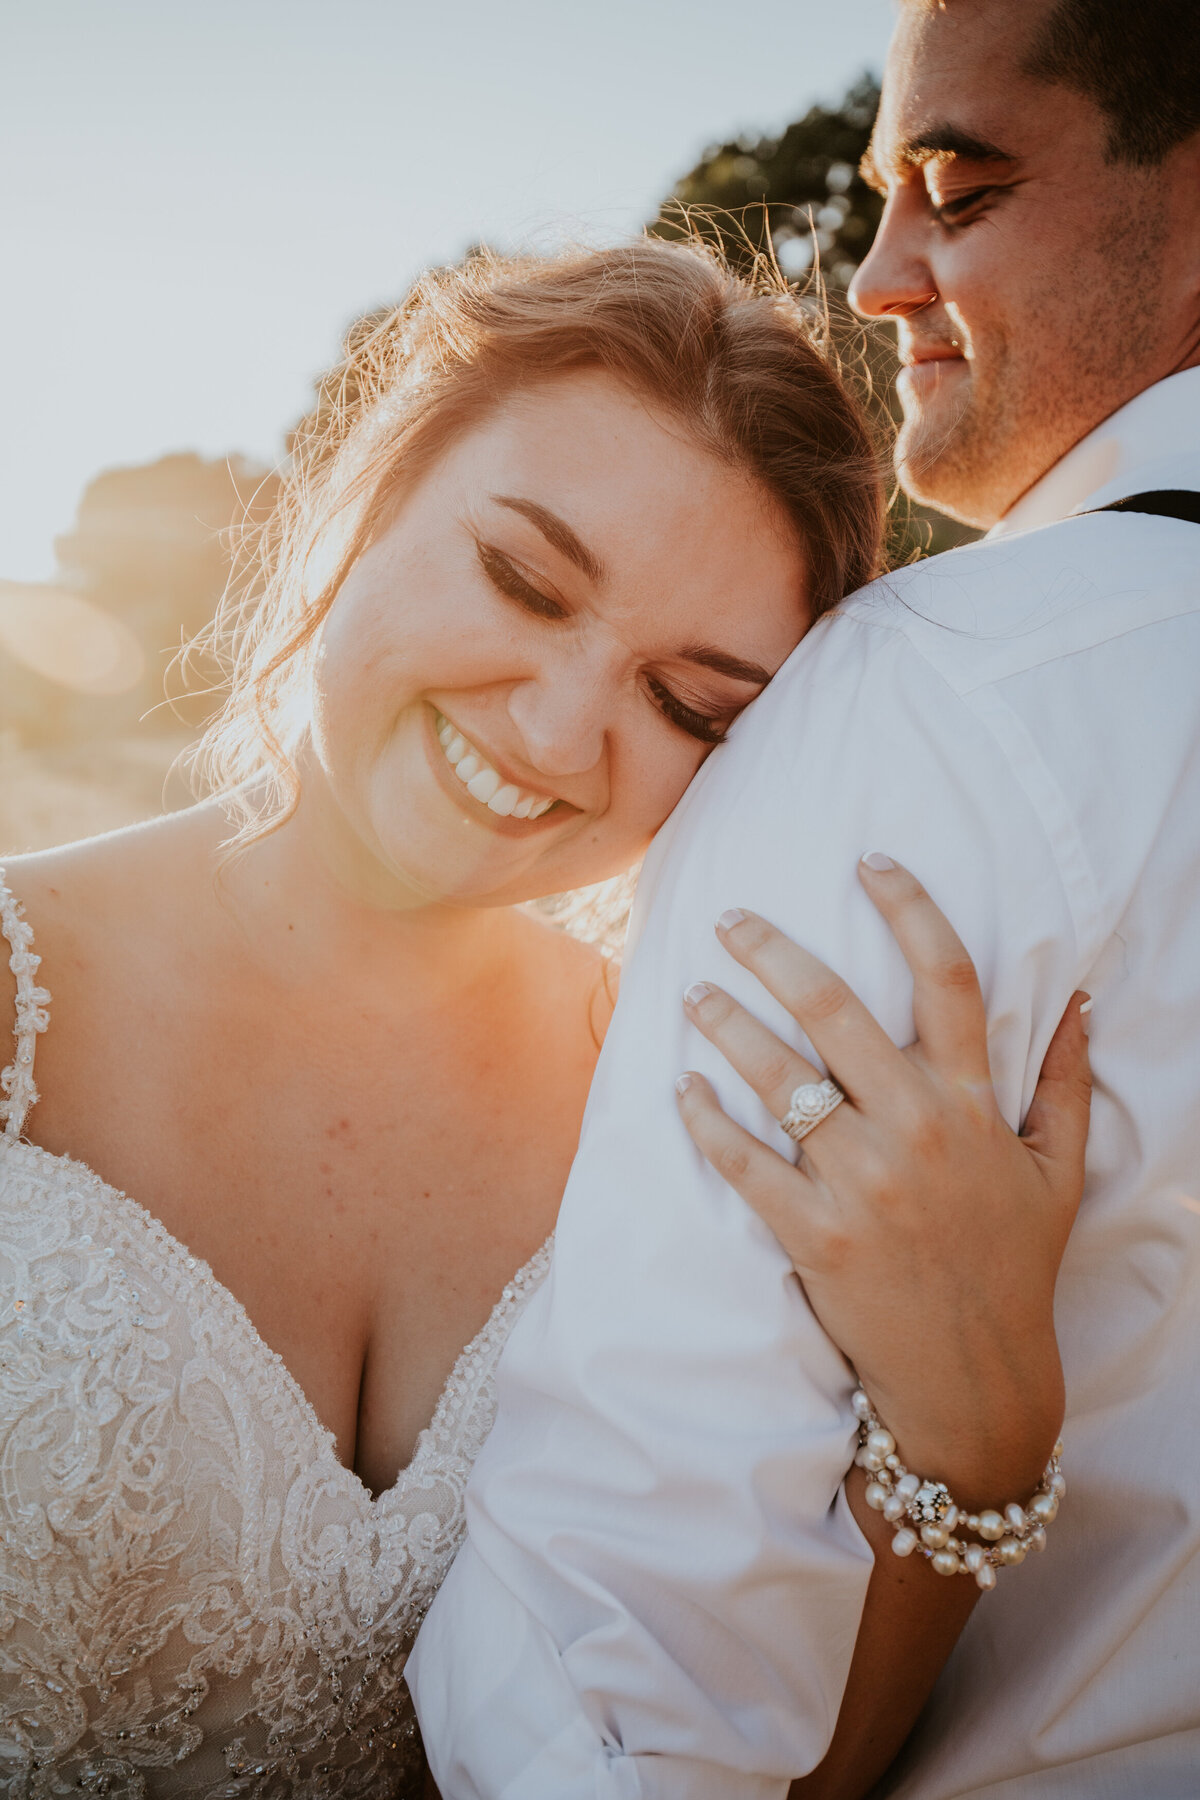 Bride leans on grooms shoulder while holding his arm as the sun rays shine.